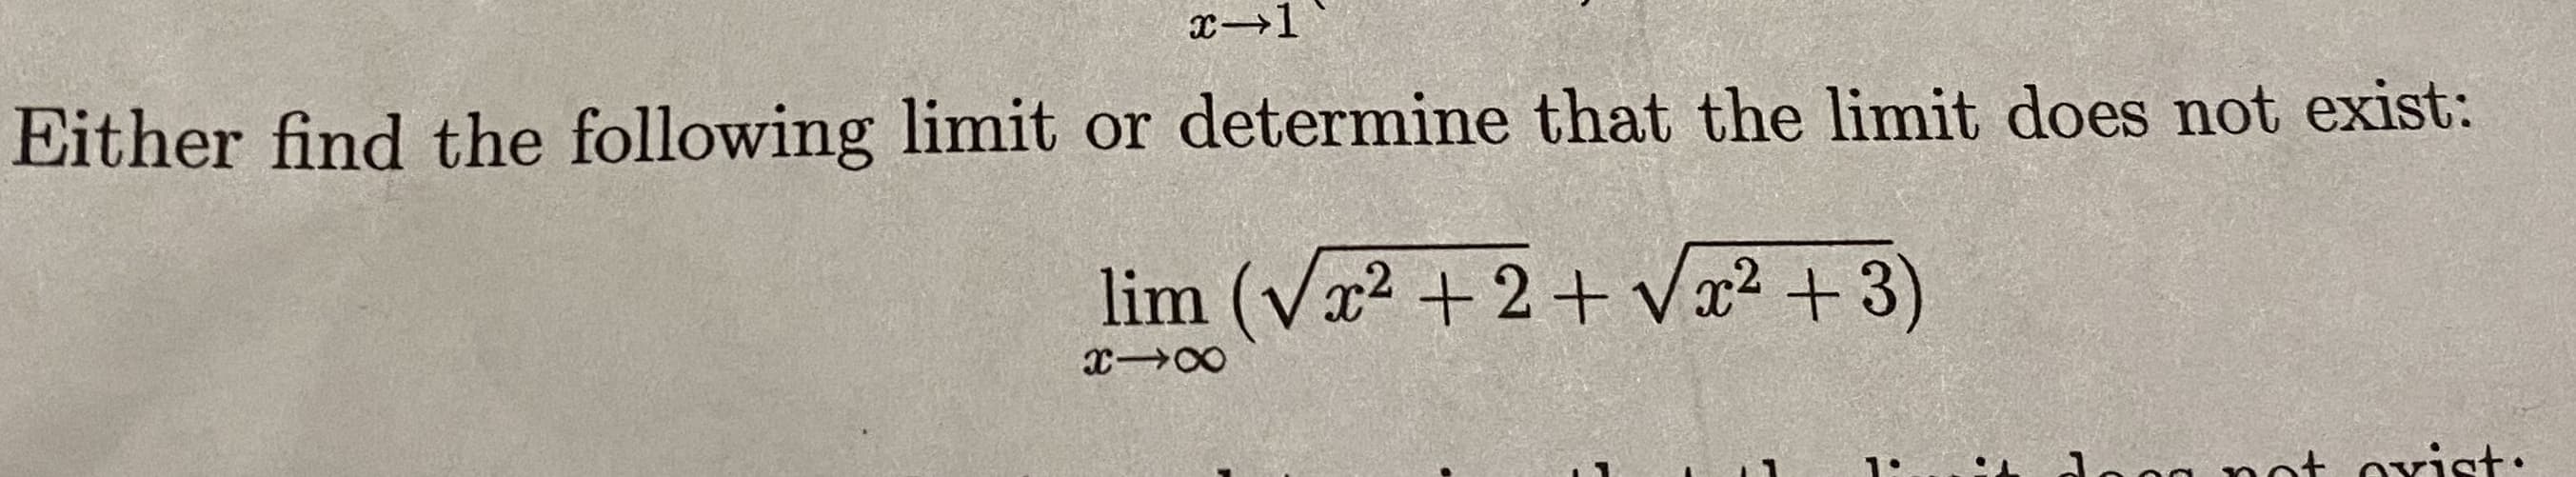 Either find the following limit or determine that the limit does not exist:
lim (Va2 + 2+ Vx² +3)
